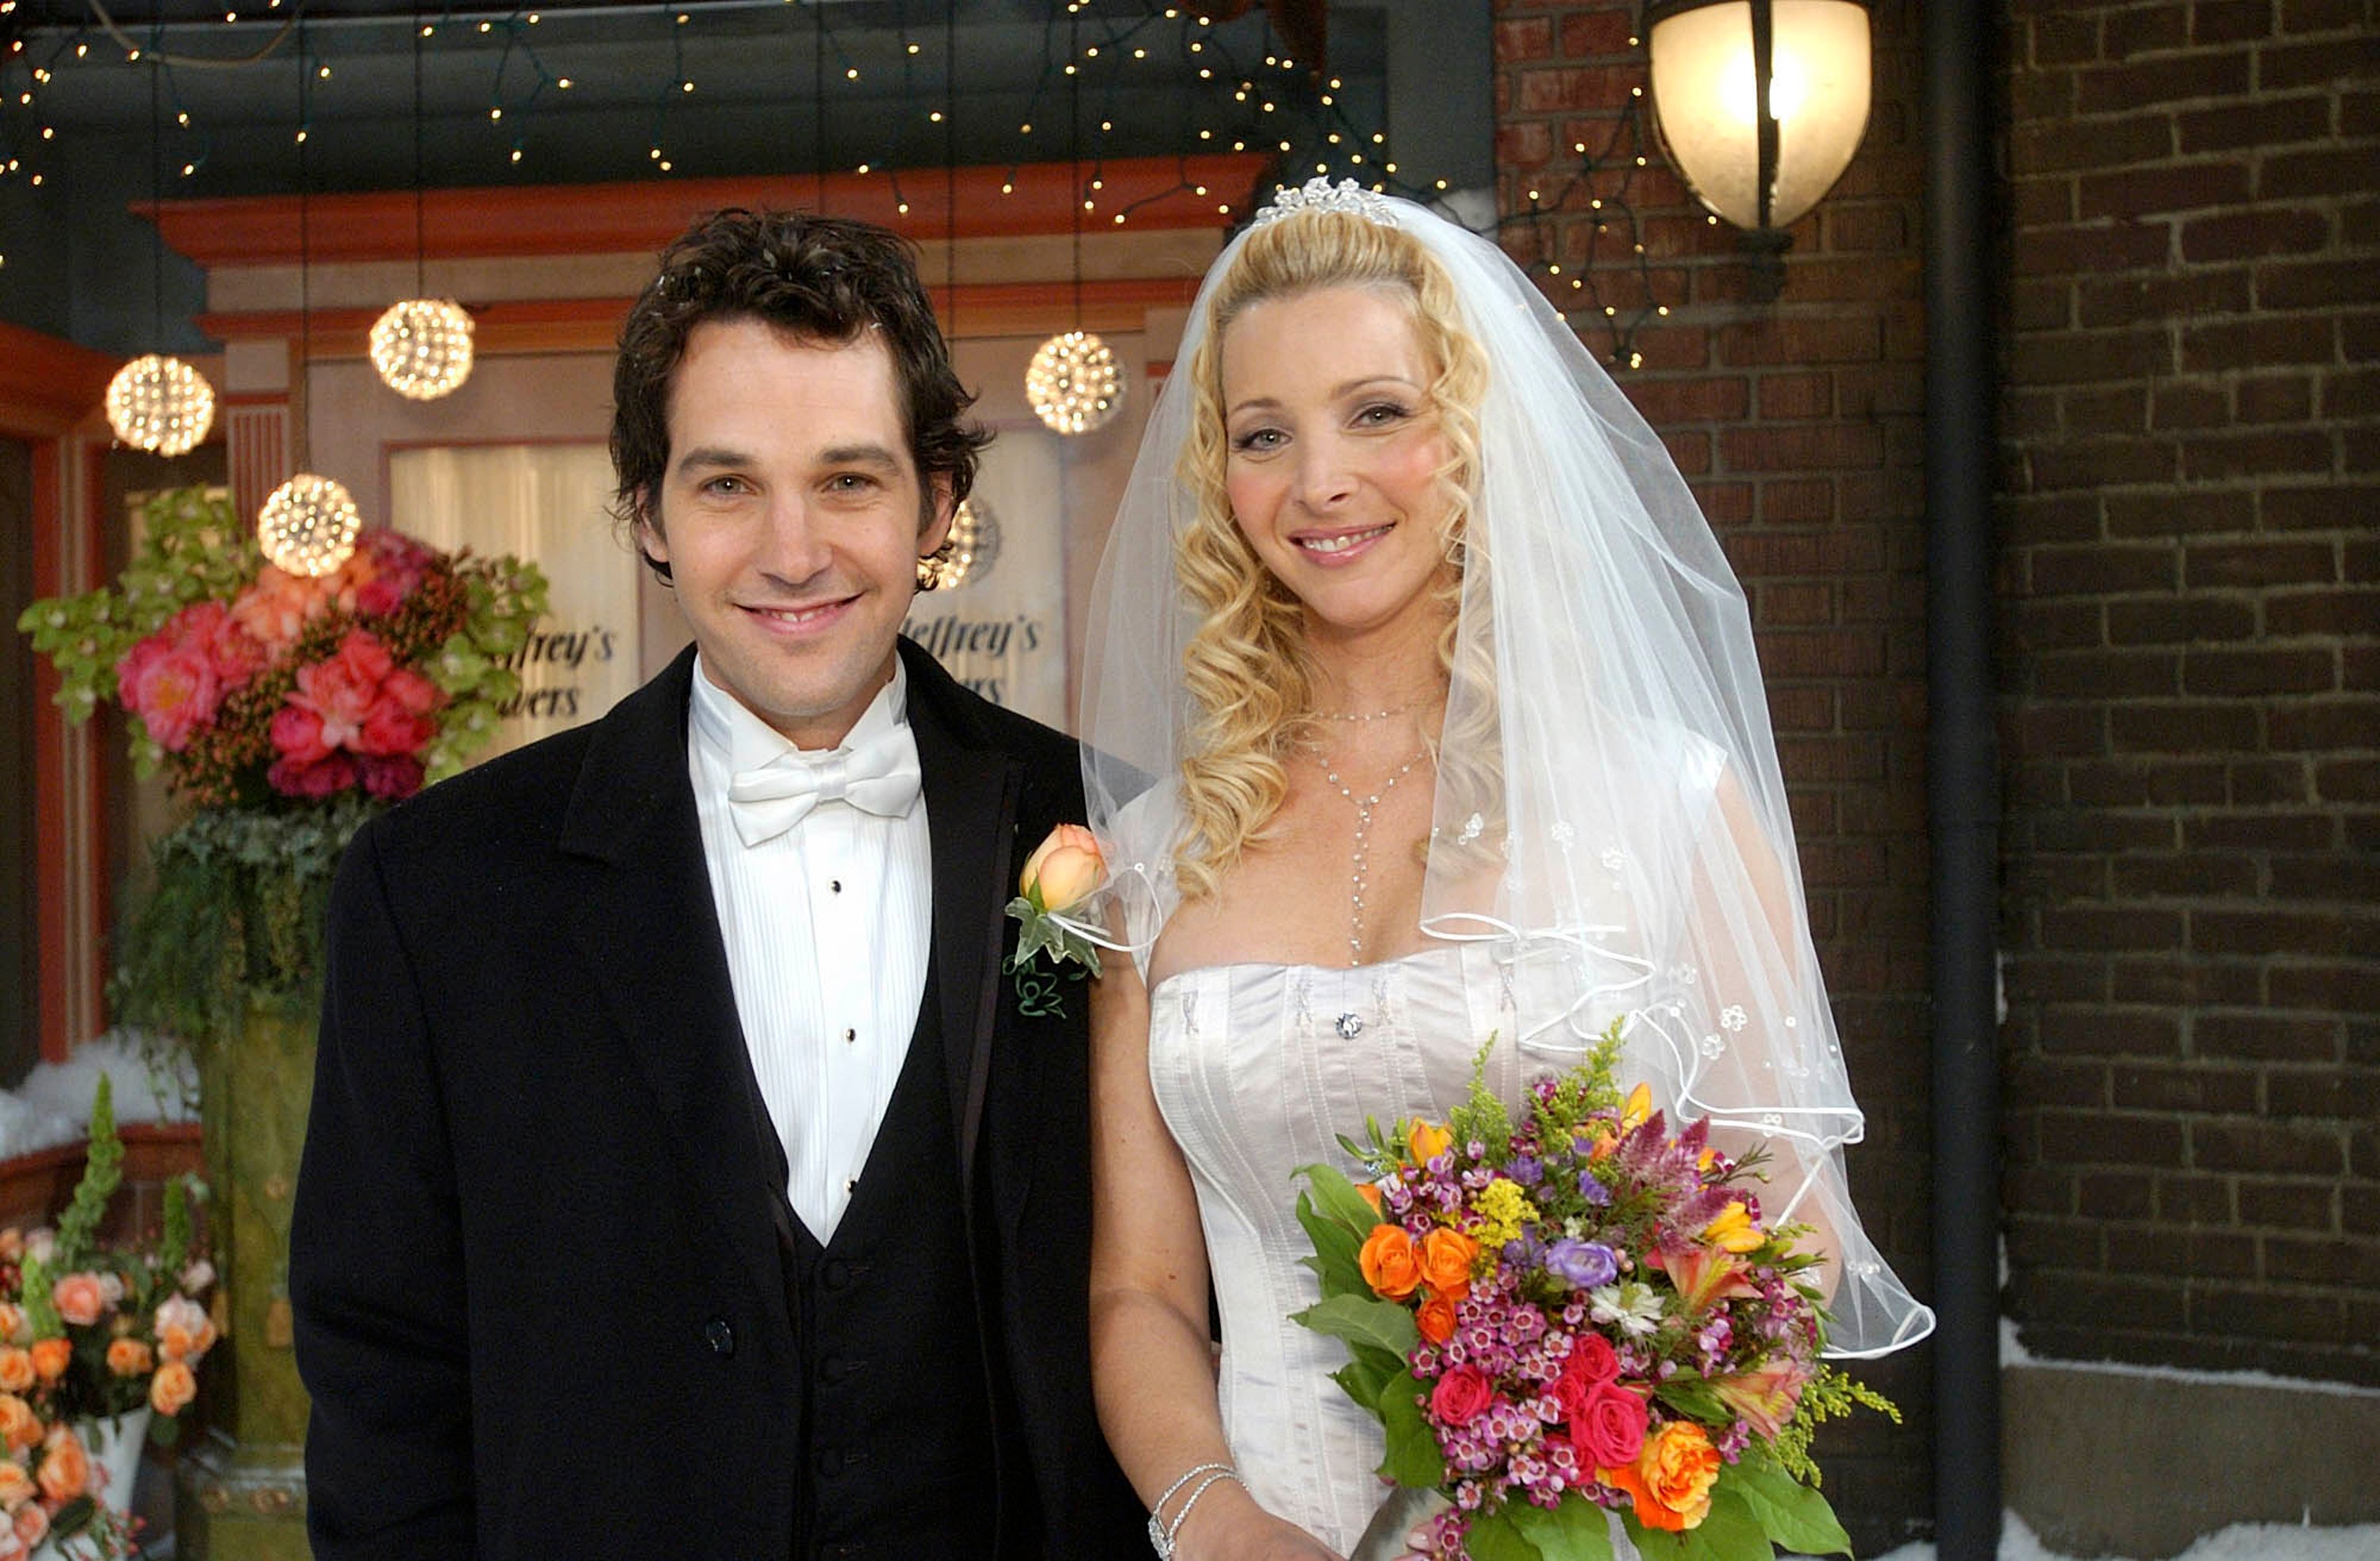 Mike Hannigan and Phoebe Buffay at their wedding on 'Friends'